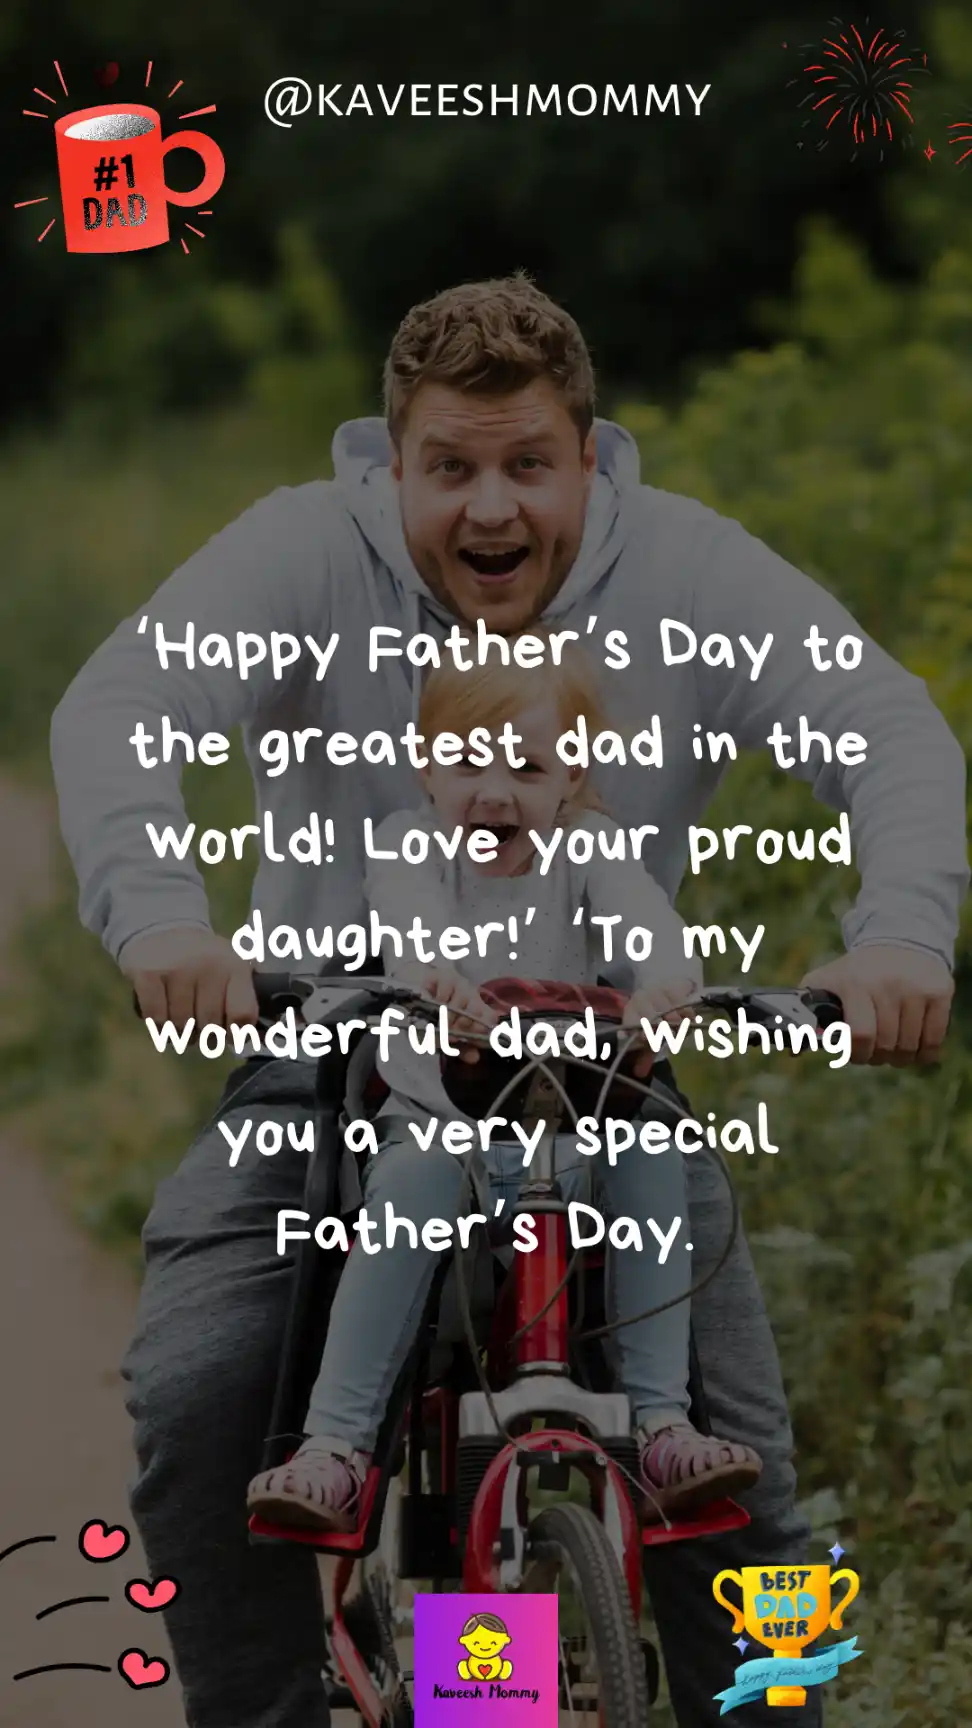 daughter father's day quote-‘Happy Father’s Day to the greatest dad in the world! Love your proud daughter!’ ‘To my wonderful dad, wishing you a very special Father’s Day.